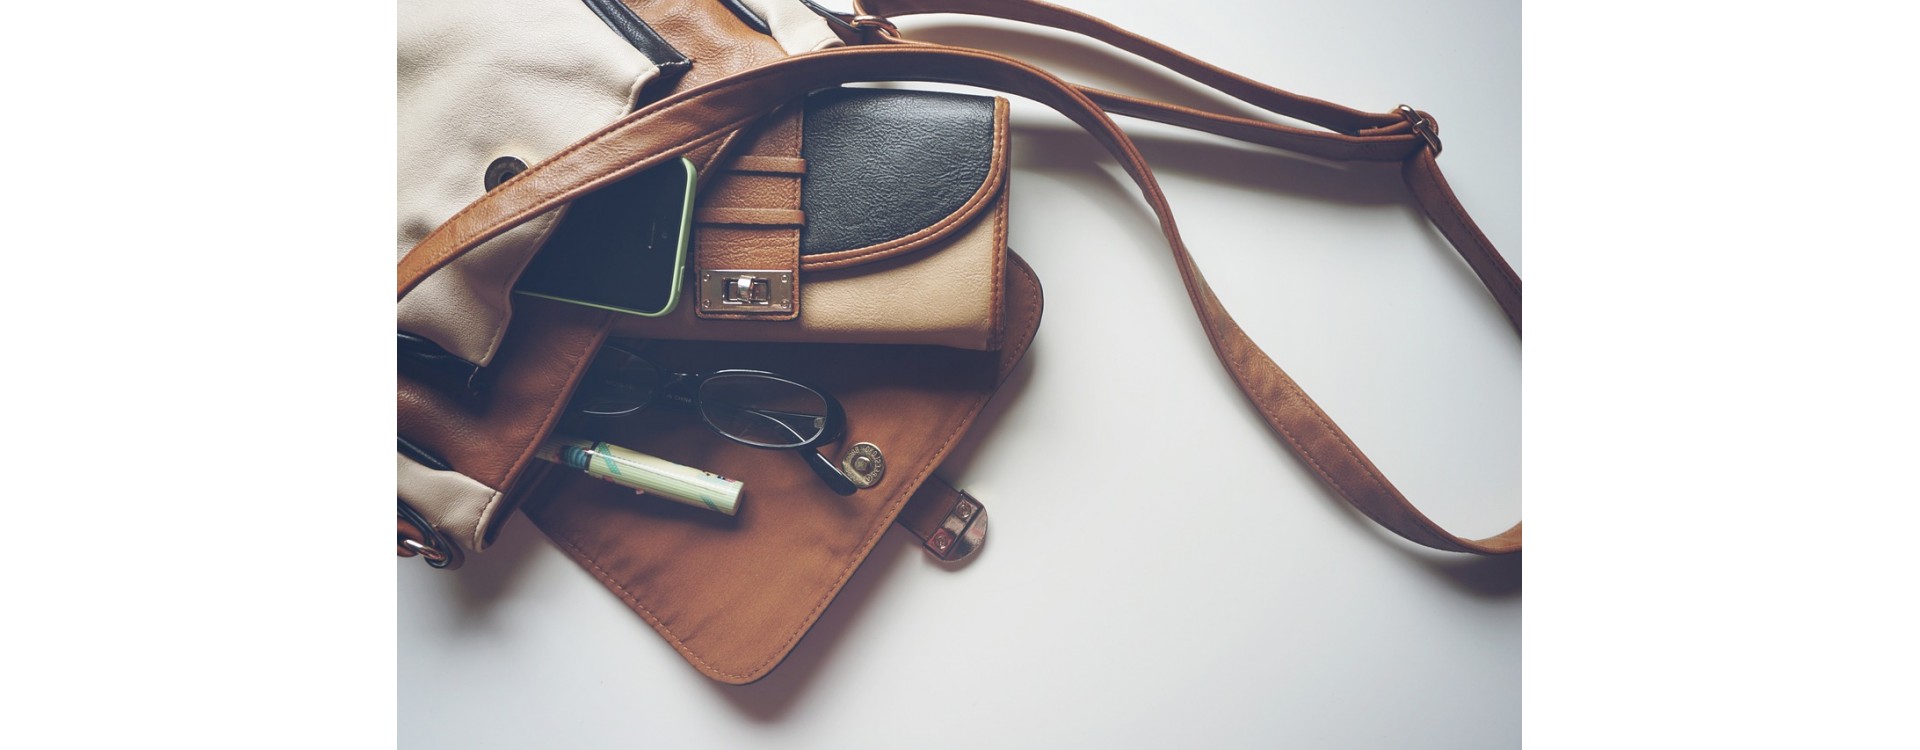 What should the ideal handbag contain ?